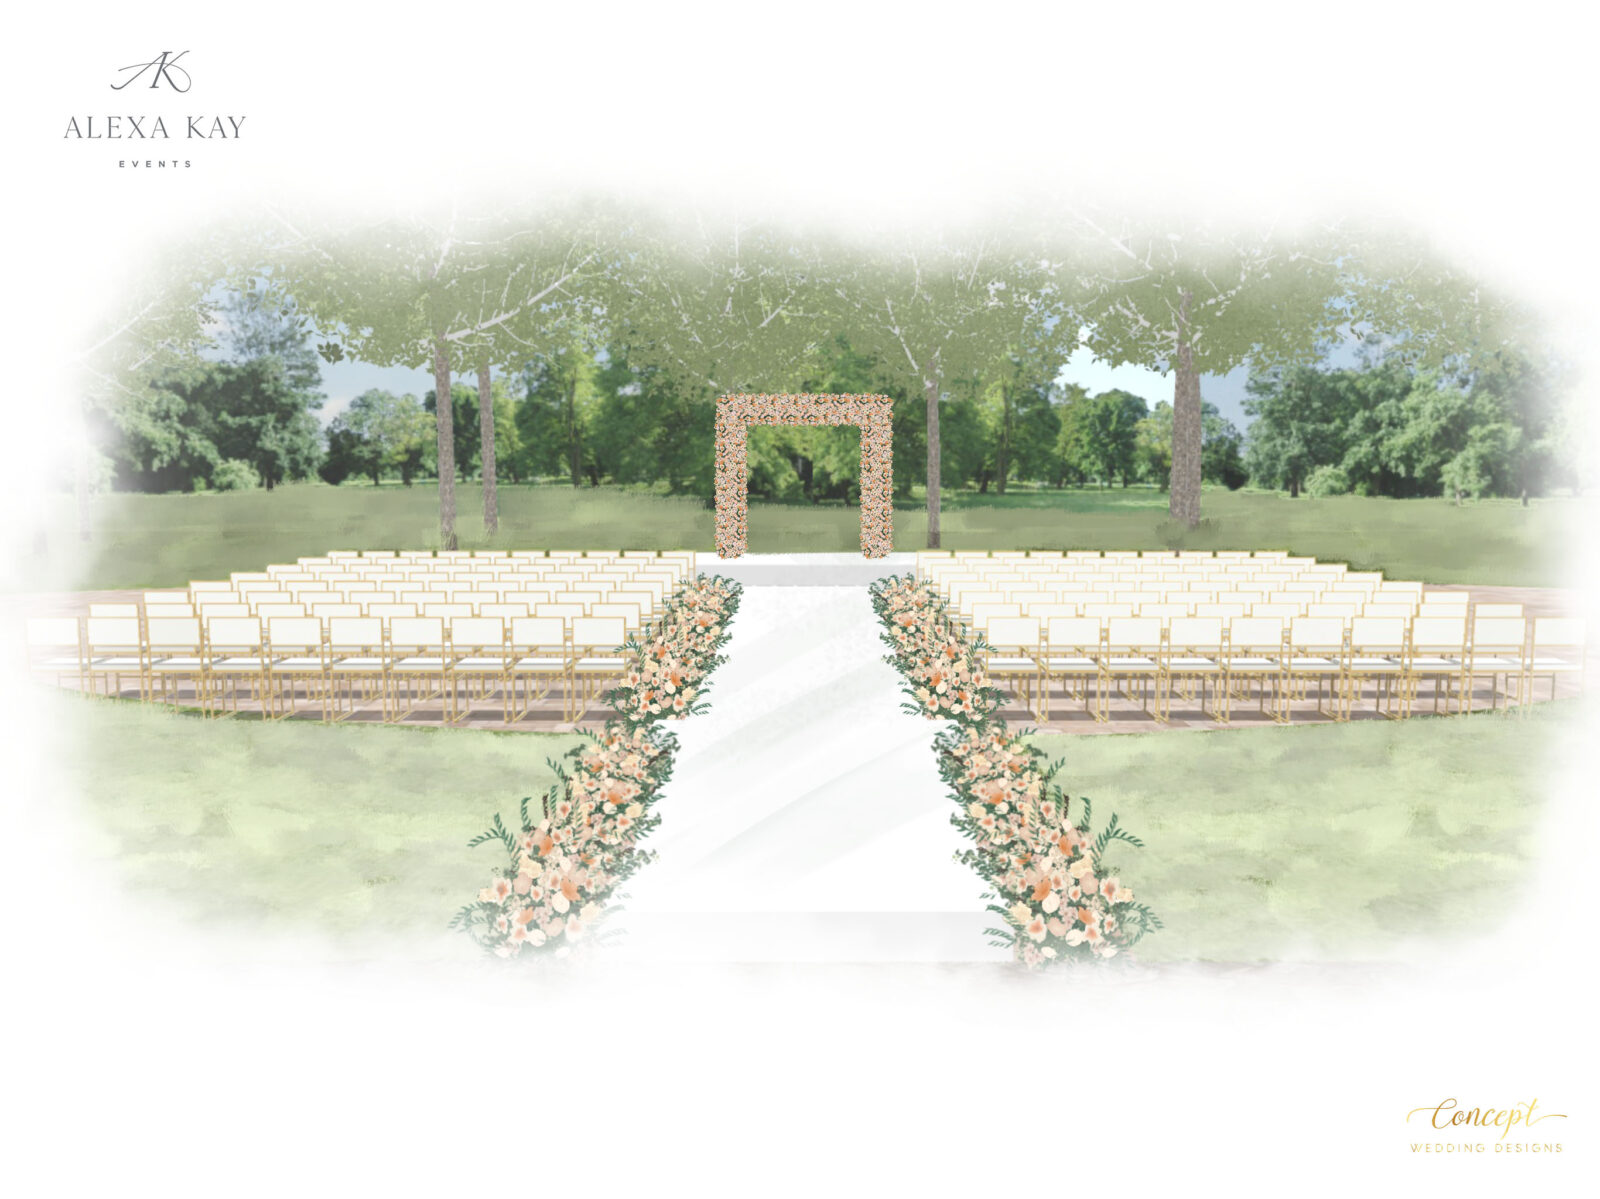 Wedding Renderings: Brooke and Eric's Wedding at The Olana